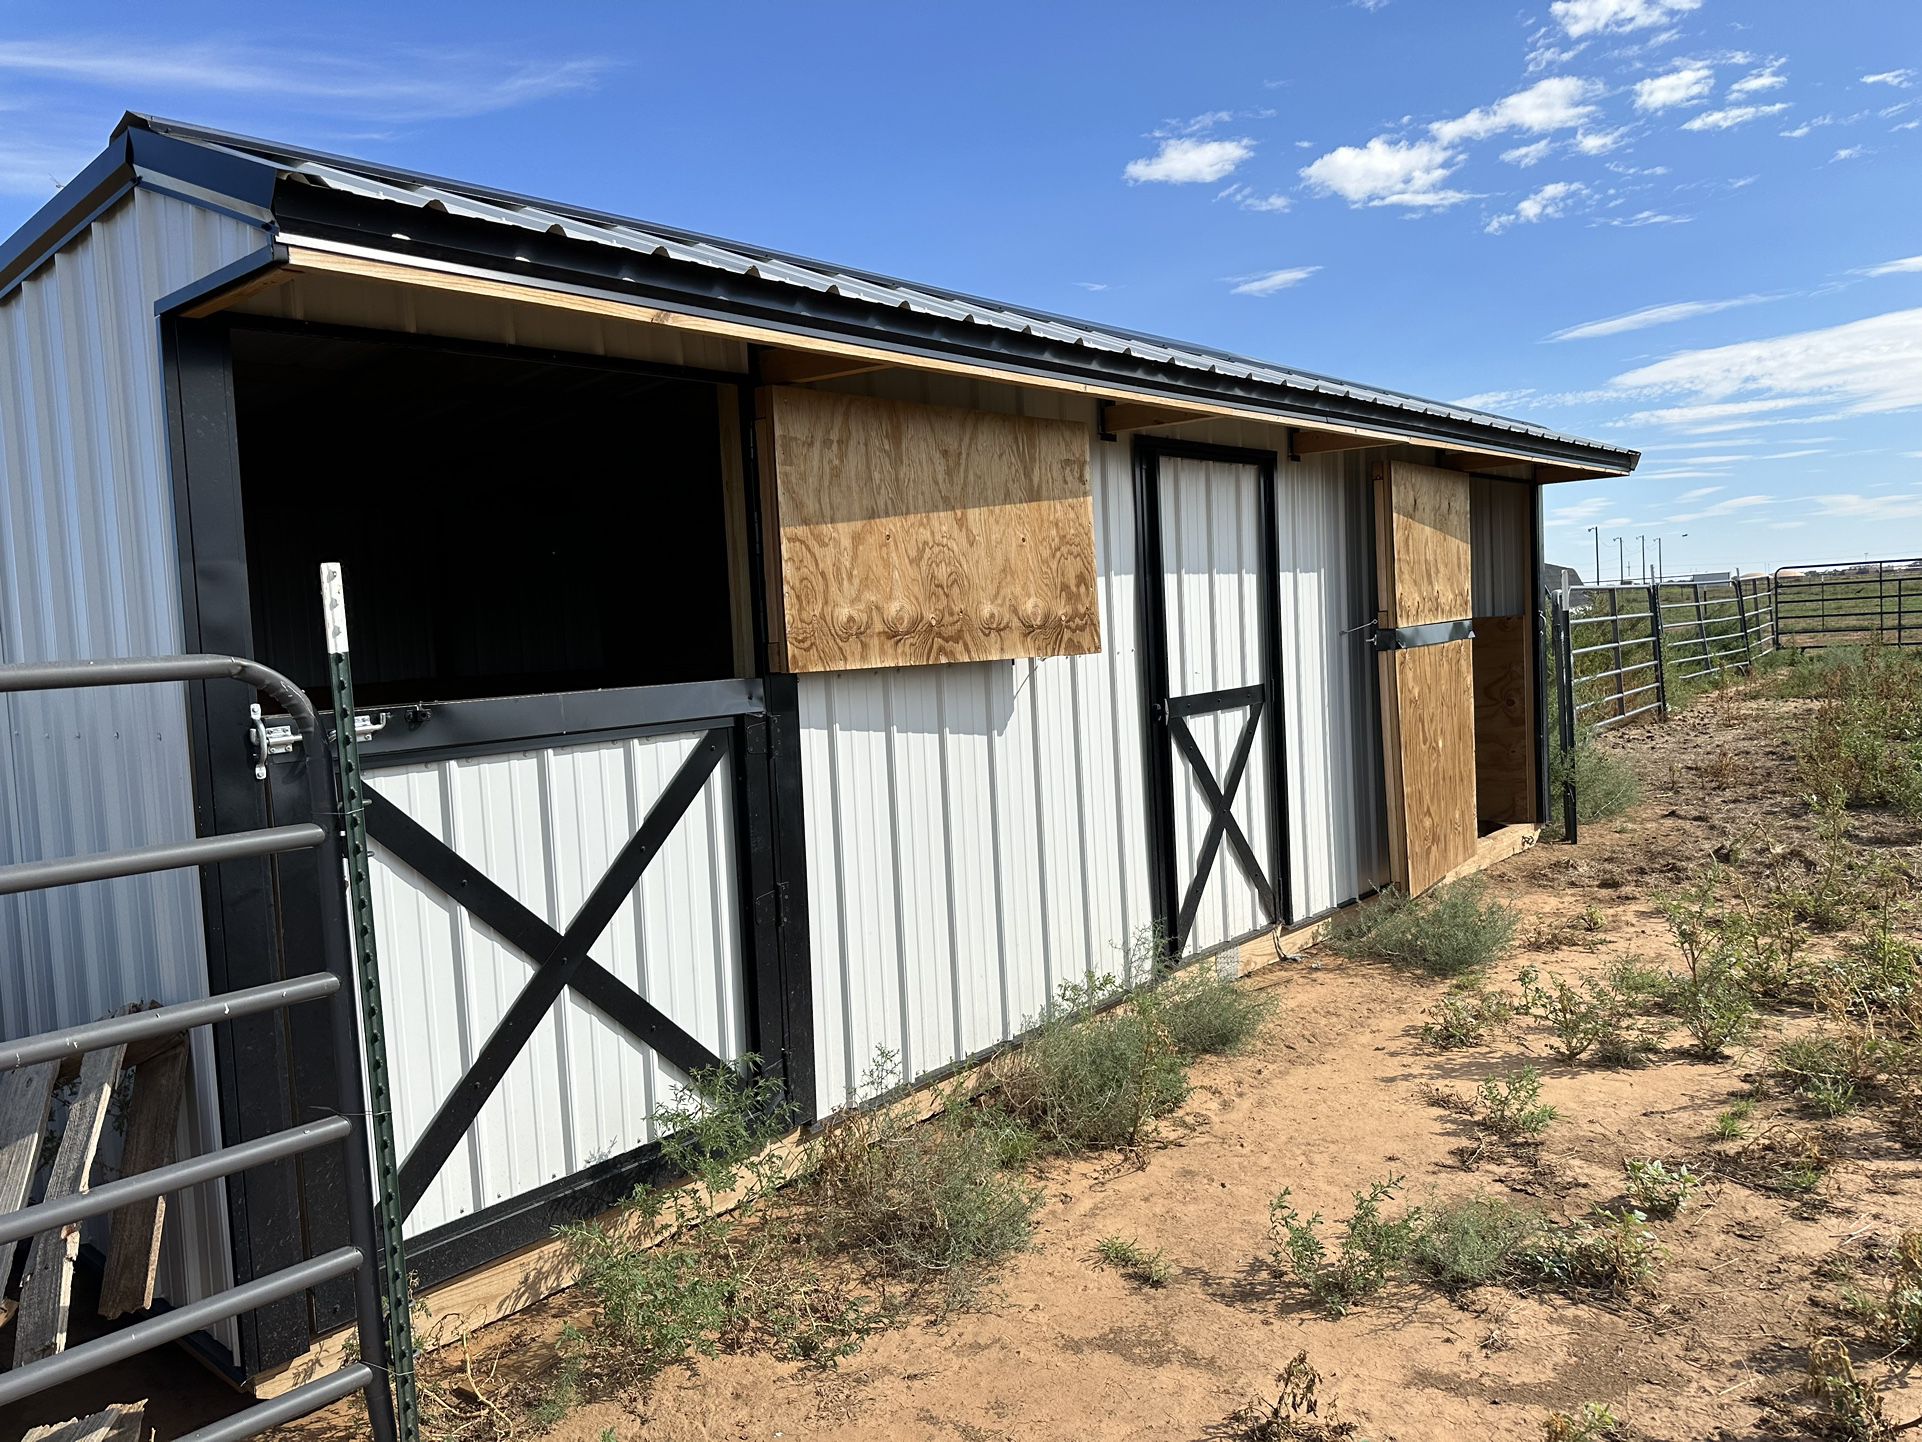 2 Horse Barn With Tack Room